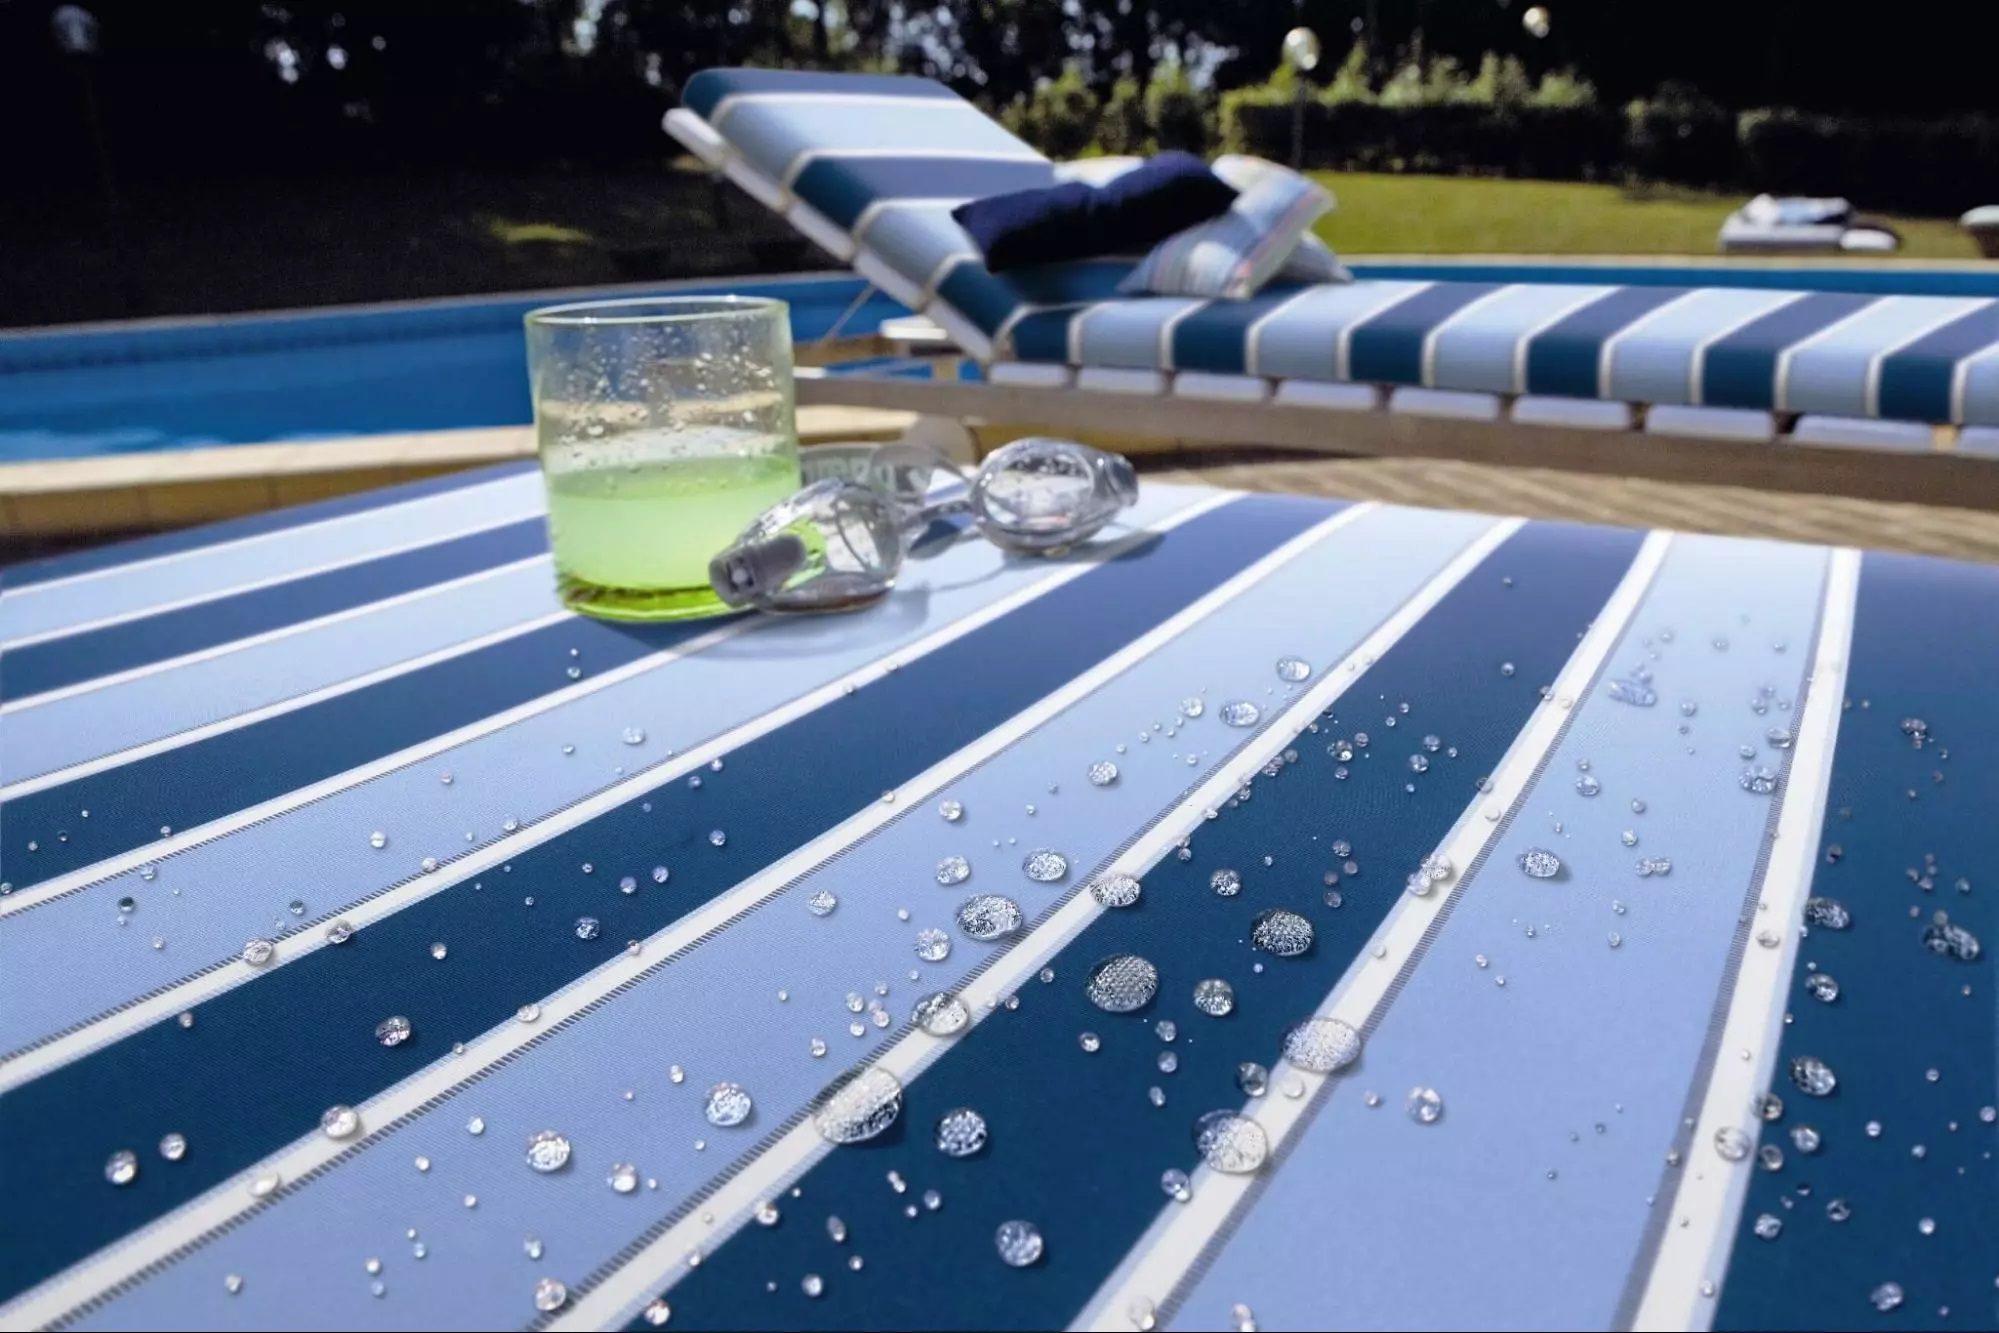 Water-resistant solution-dyed acrylic fabric with droplets of water near a pool